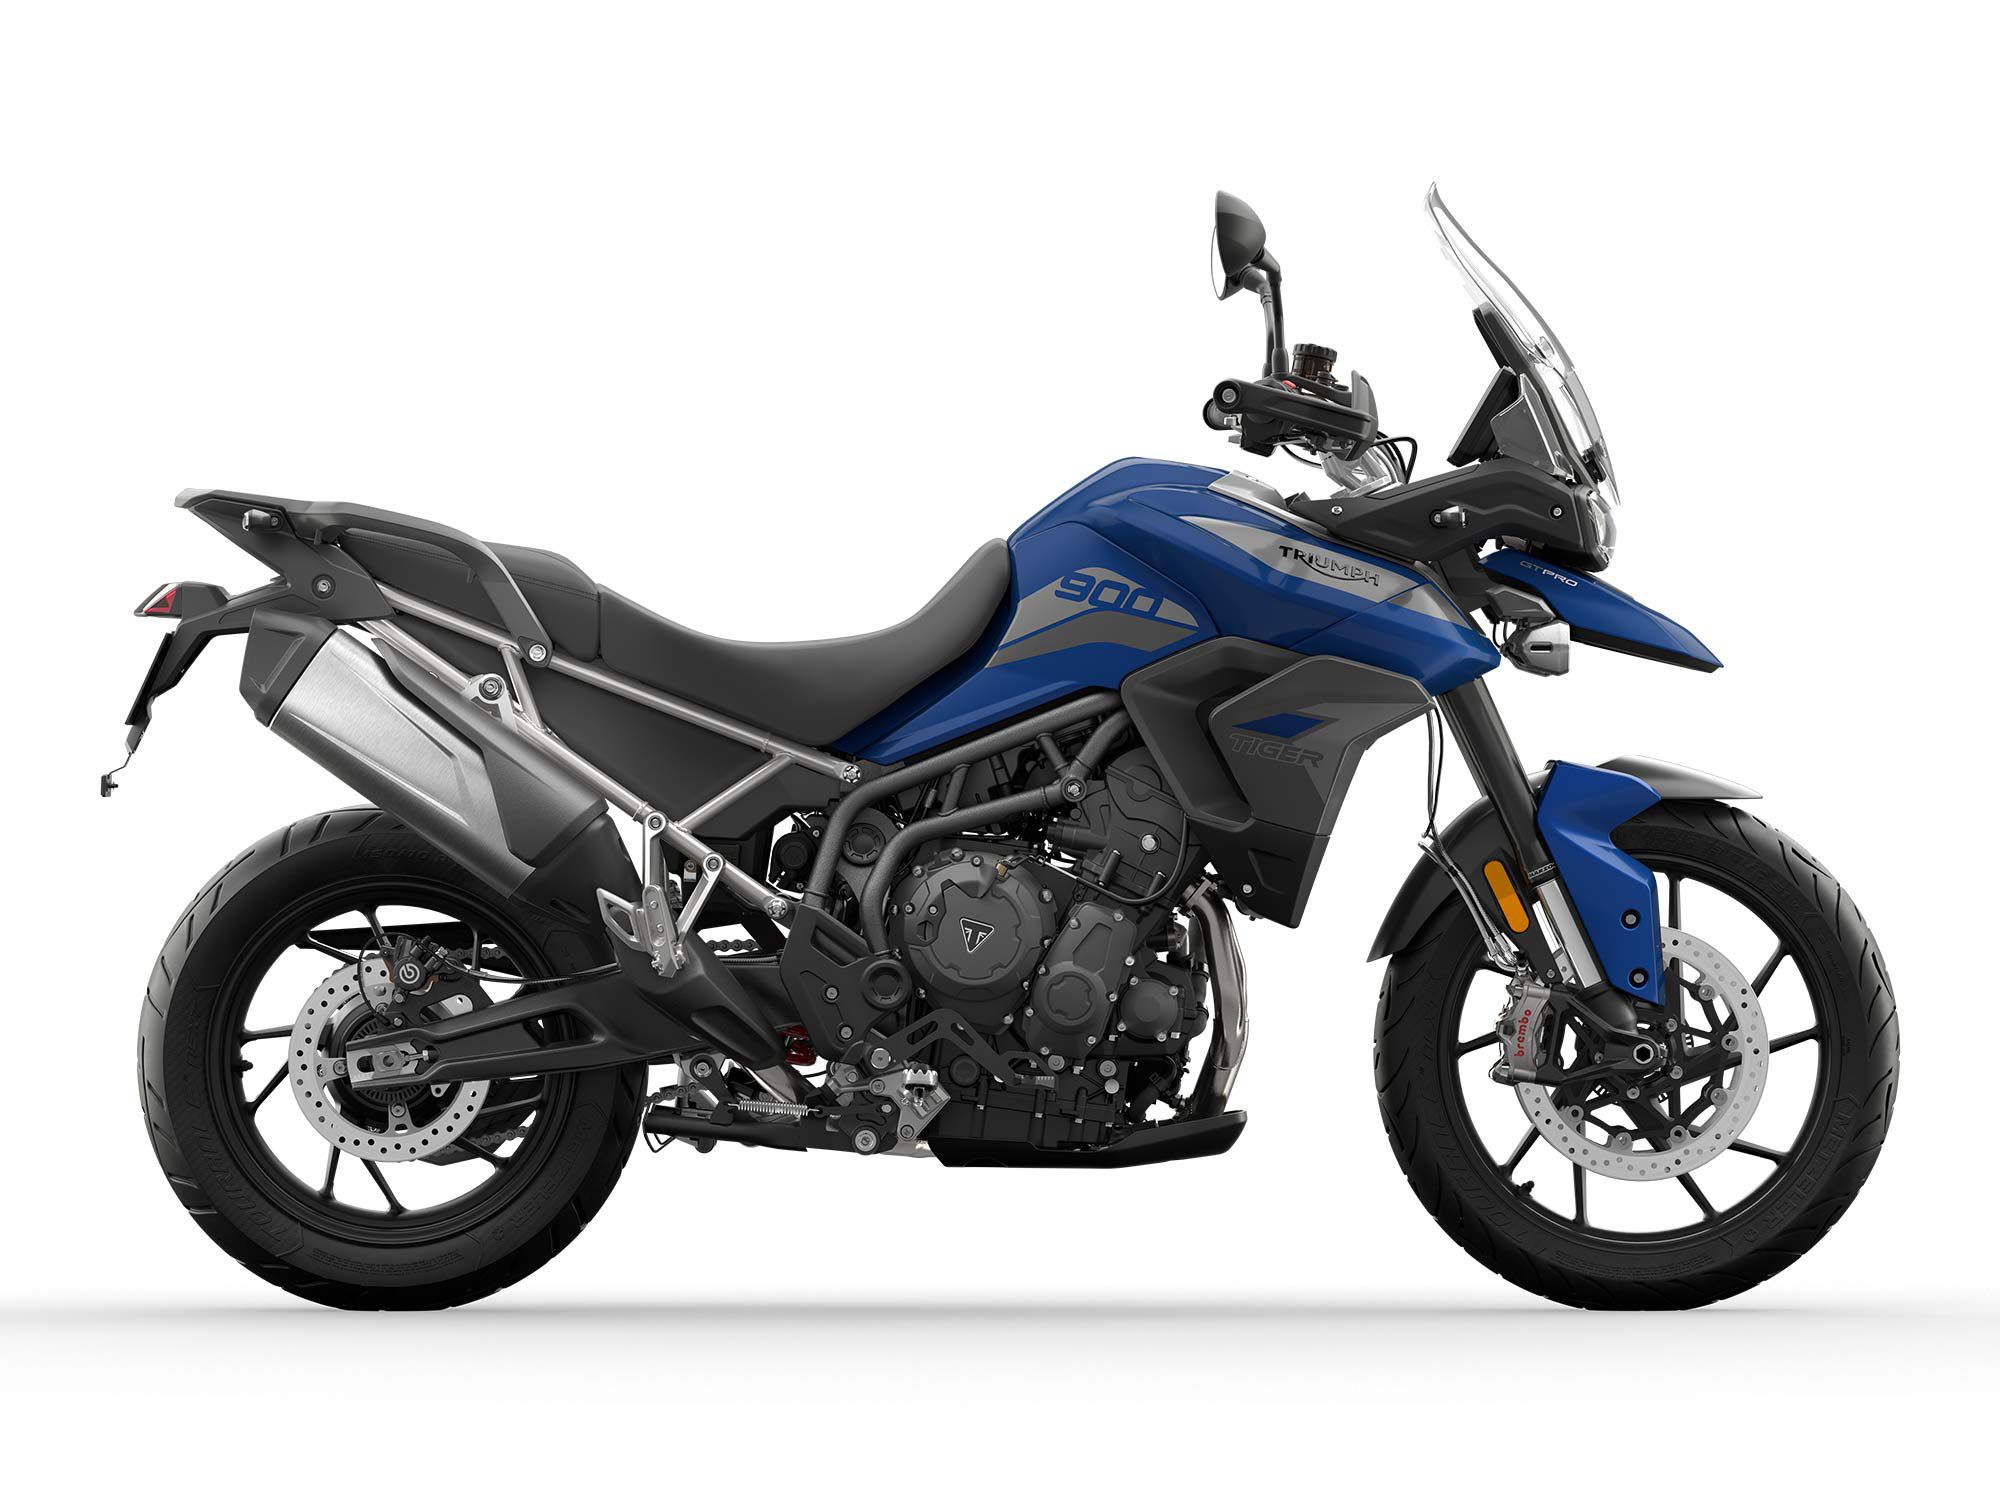 Tiger 900 GT and GT Pro – Caspian Blue and Matte Graphite